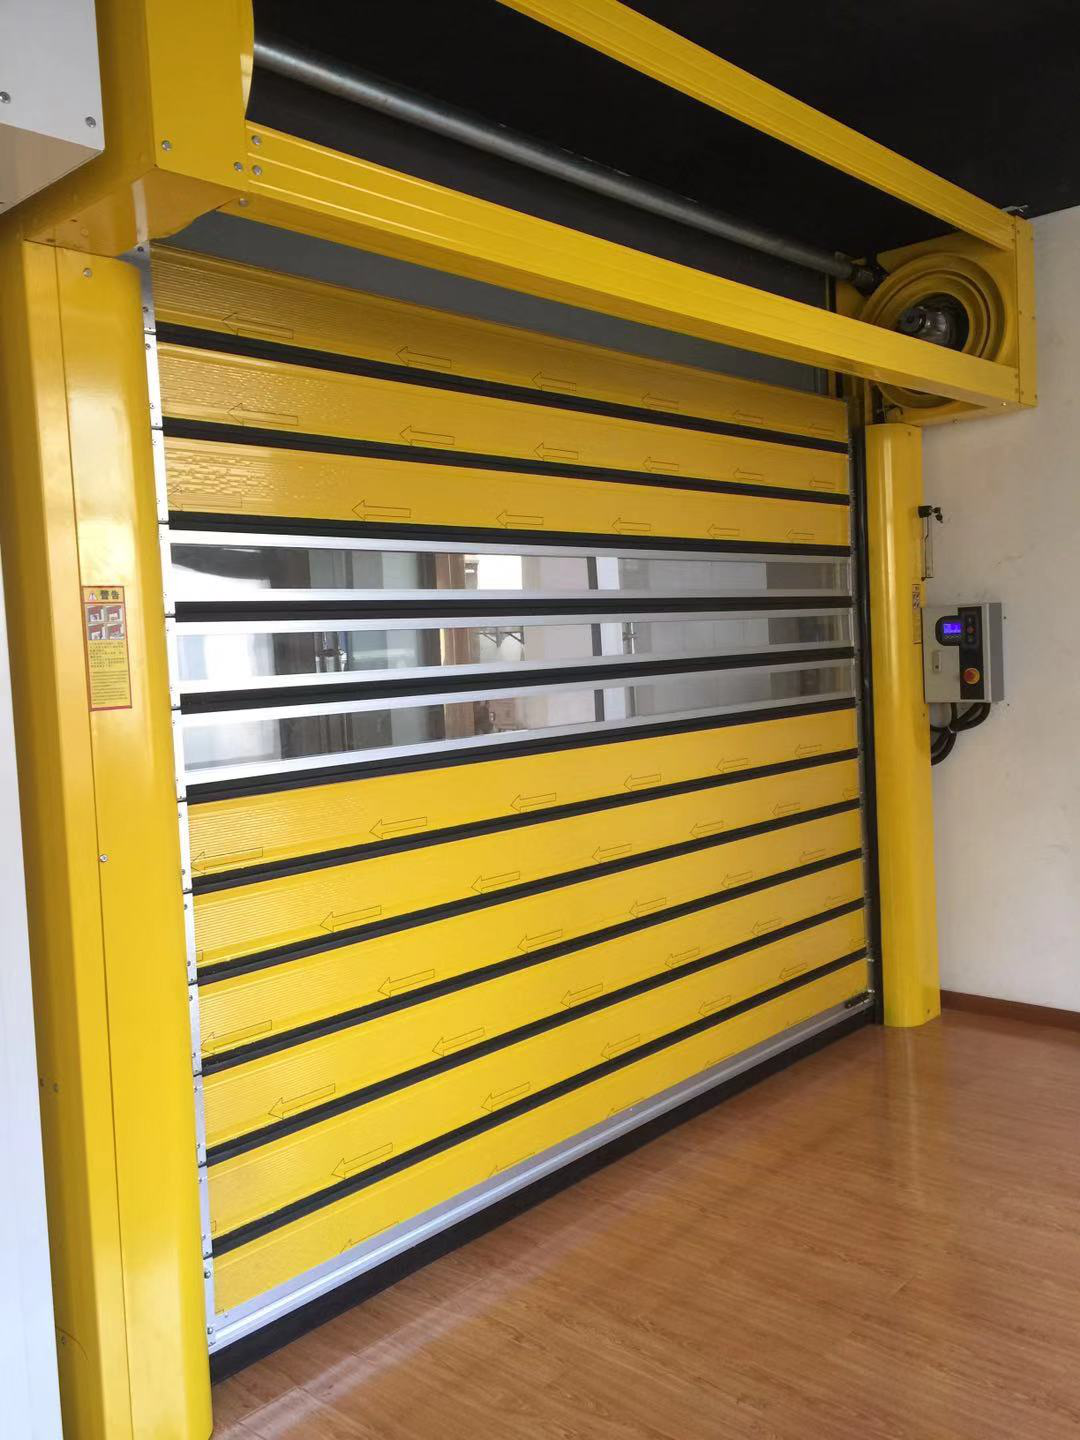 The Specification of High Speed Spiral Doors